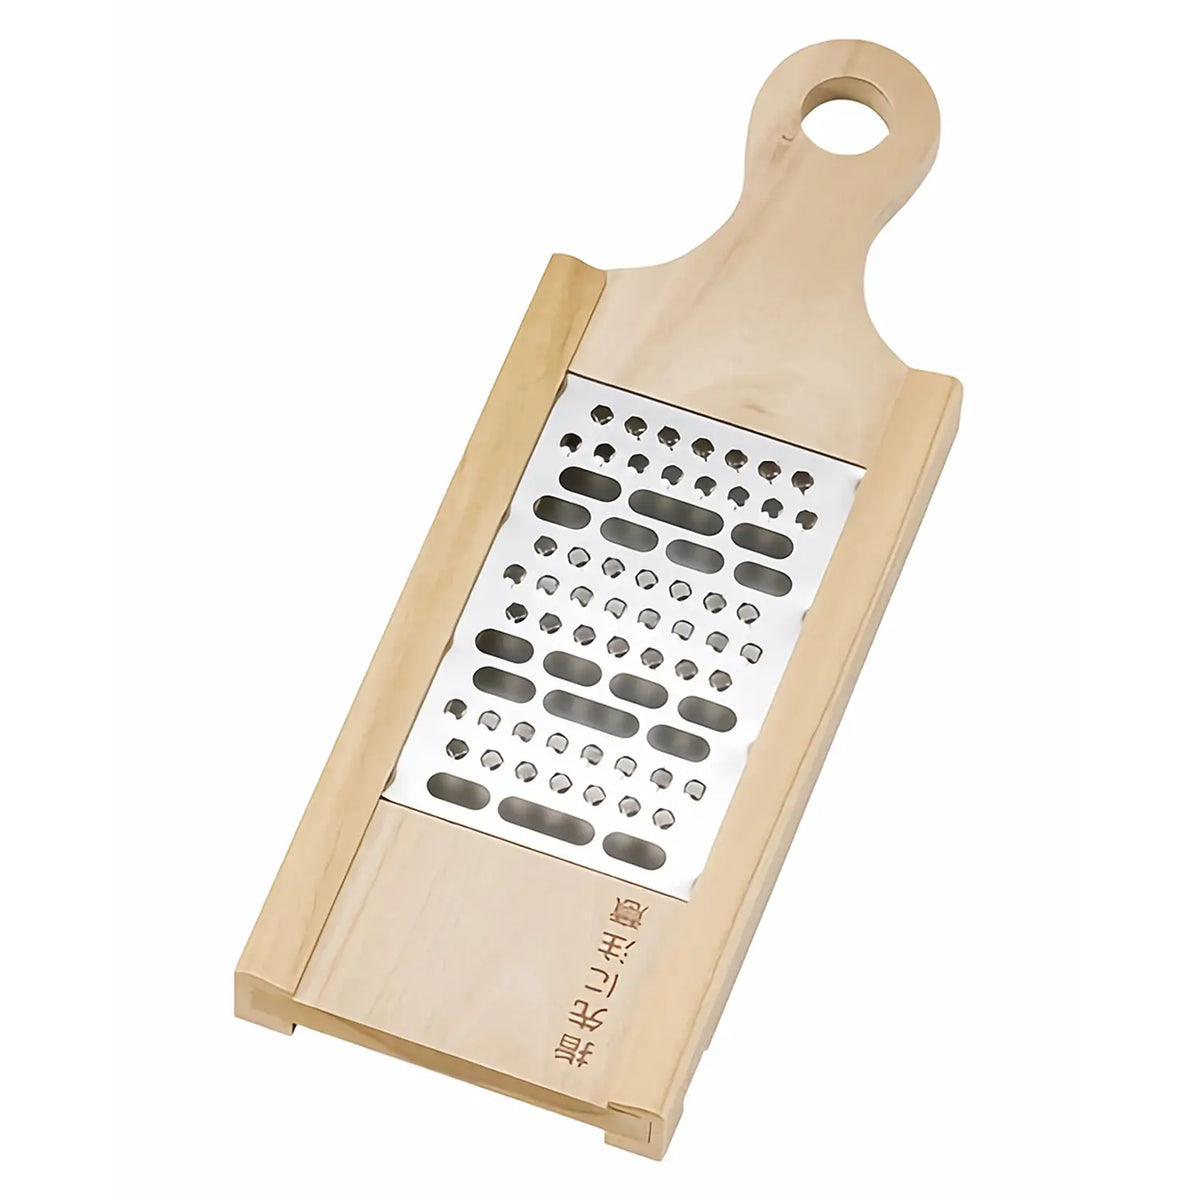 Oyanagi Sangyou Stainless Steel Grater